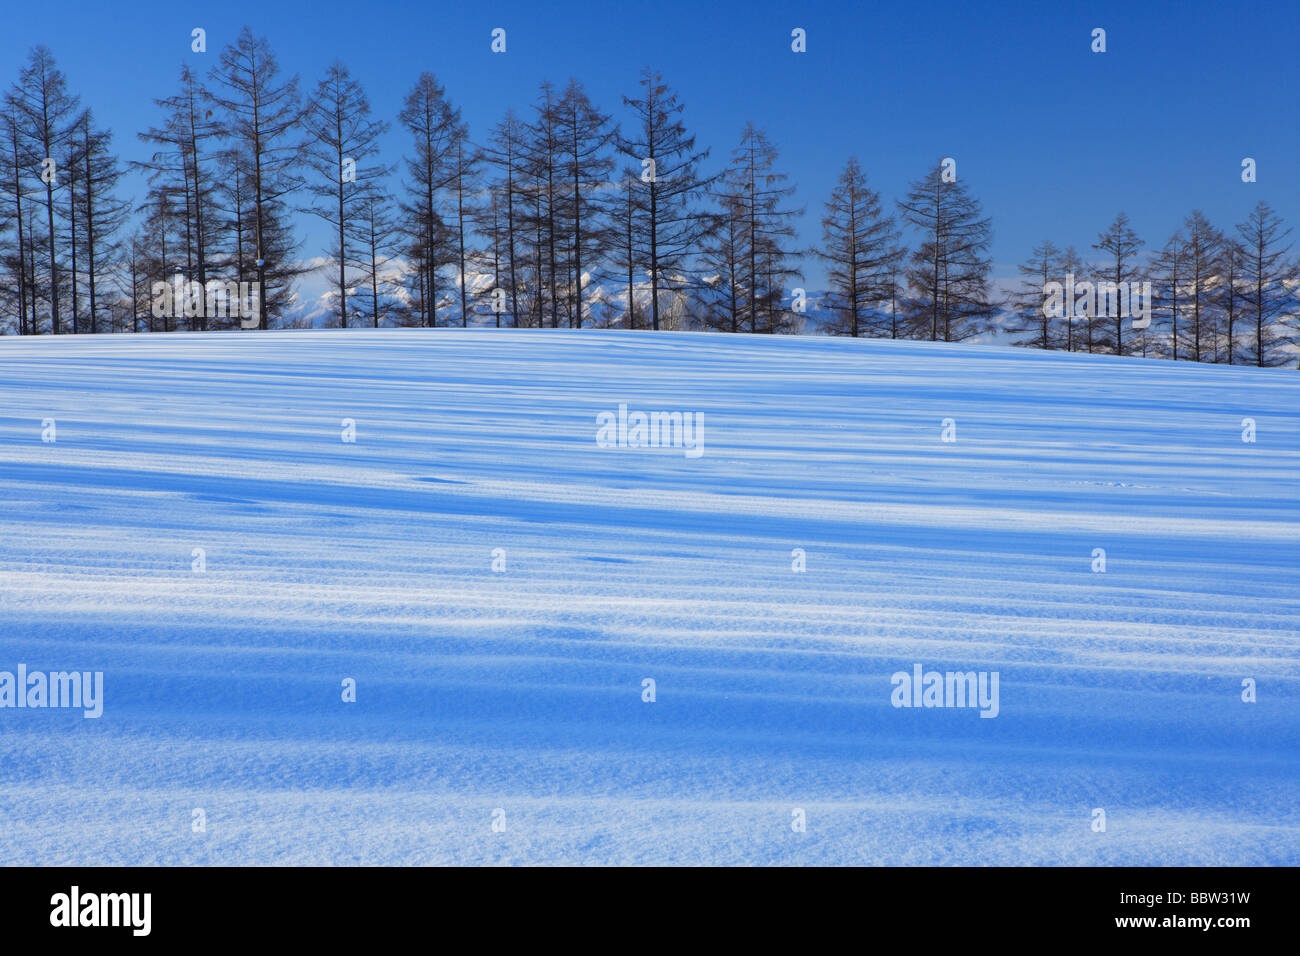 Snow-covered trees in snowfield with mountains in background Stock Photo